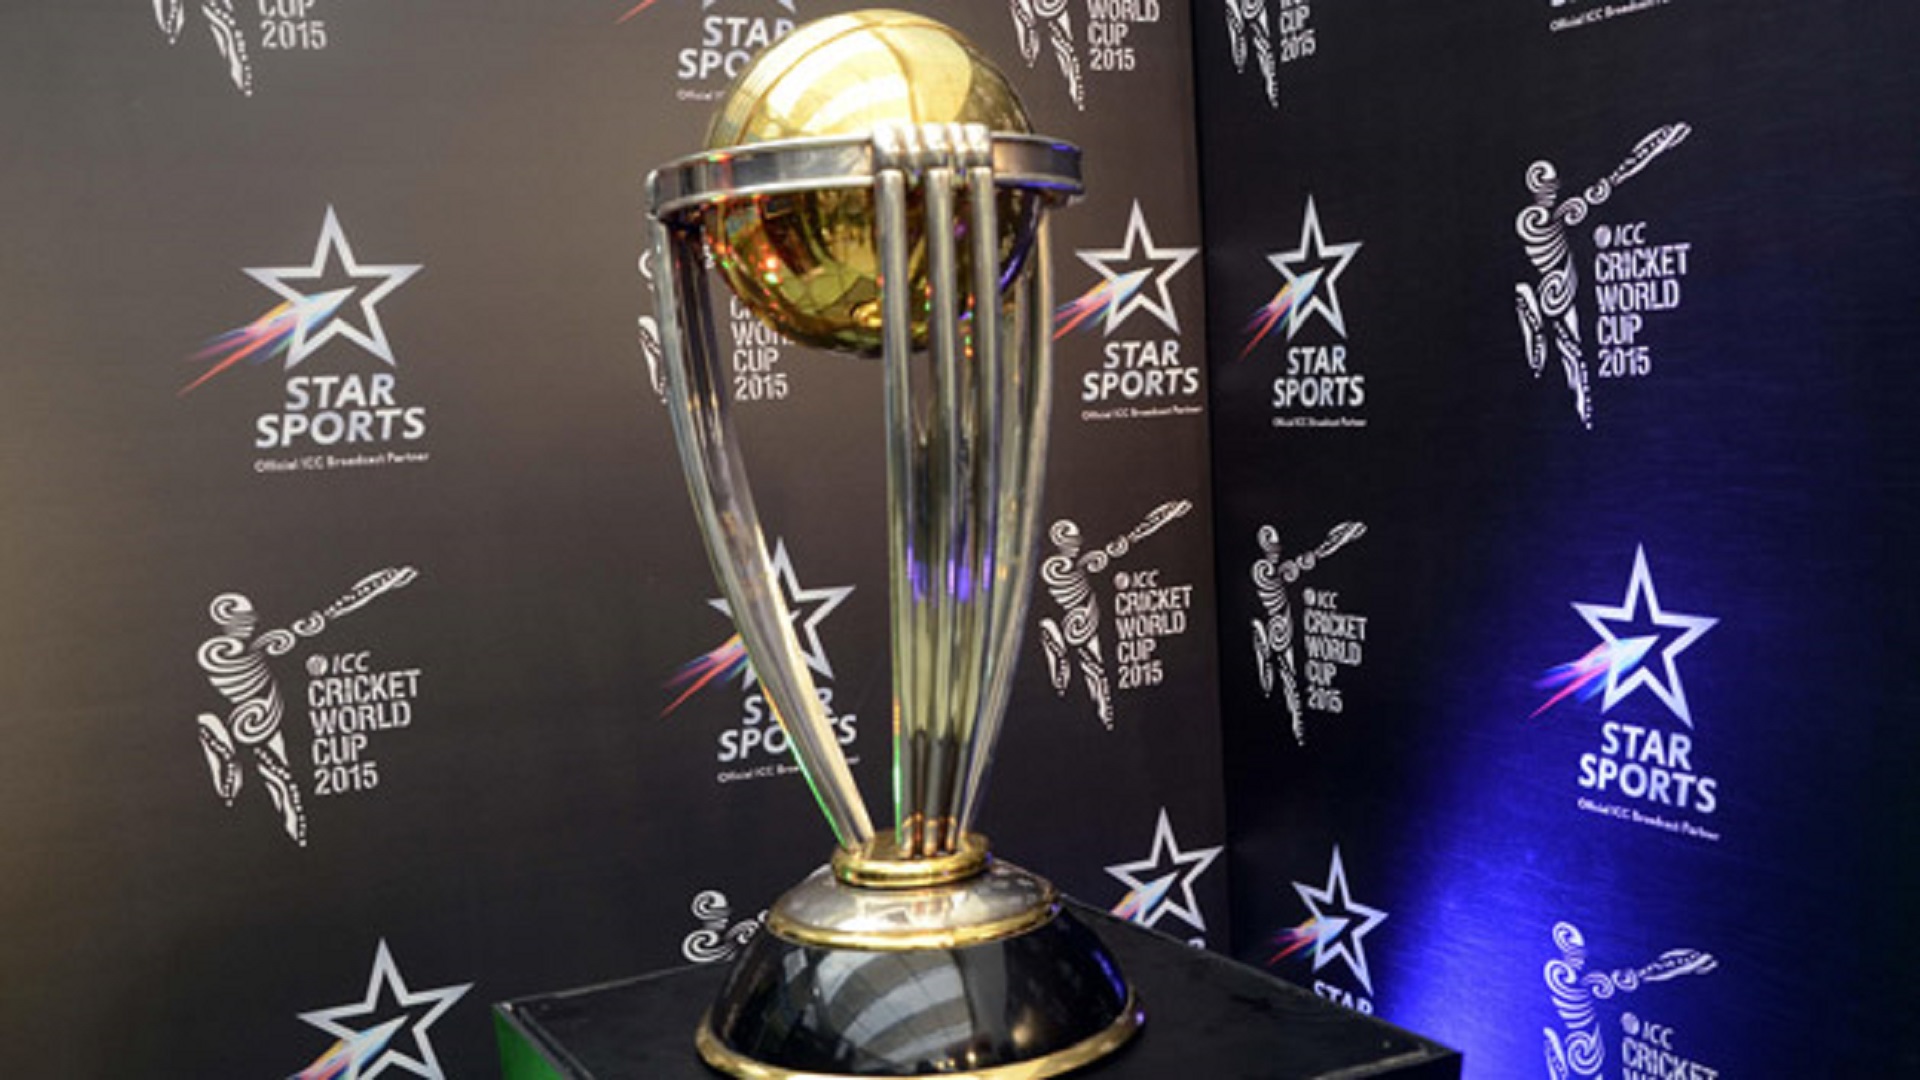 ICC Mens Cricket World Cup gives GDP 350 million boost to UK economy